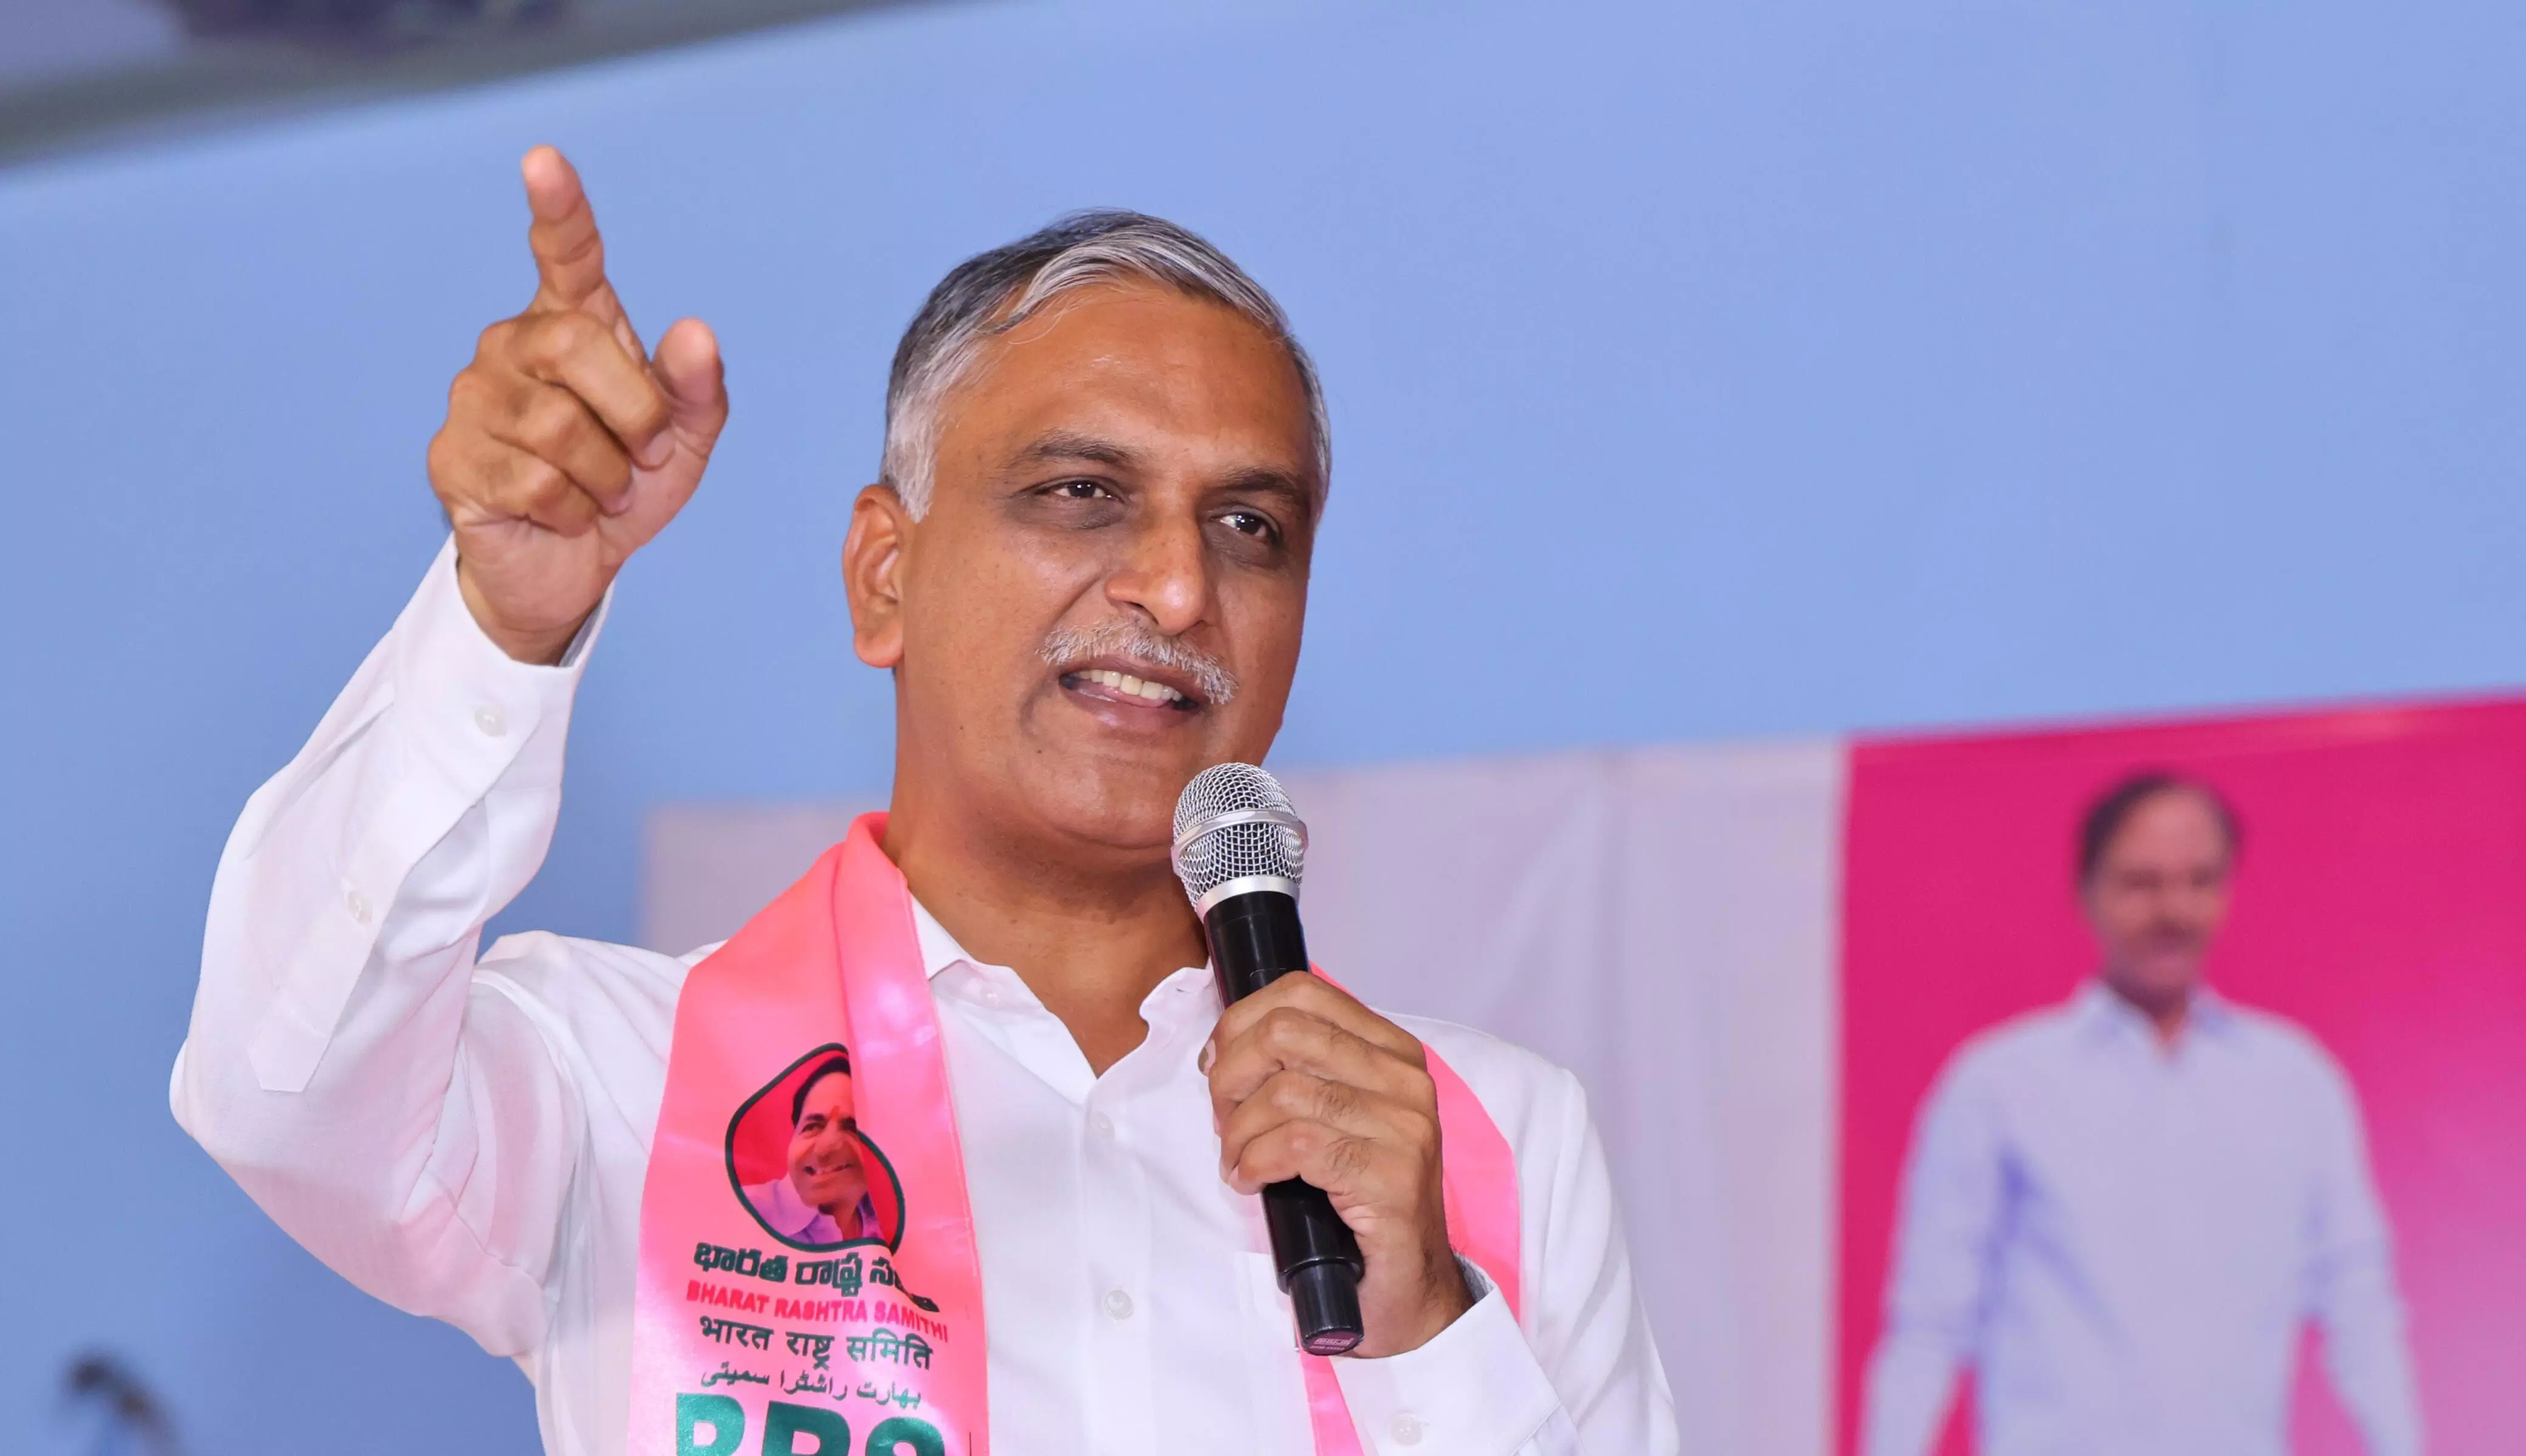 Revanth Reddys verbal attacks reflect nervousness as BRS exposes govts flaws: Harish Rao